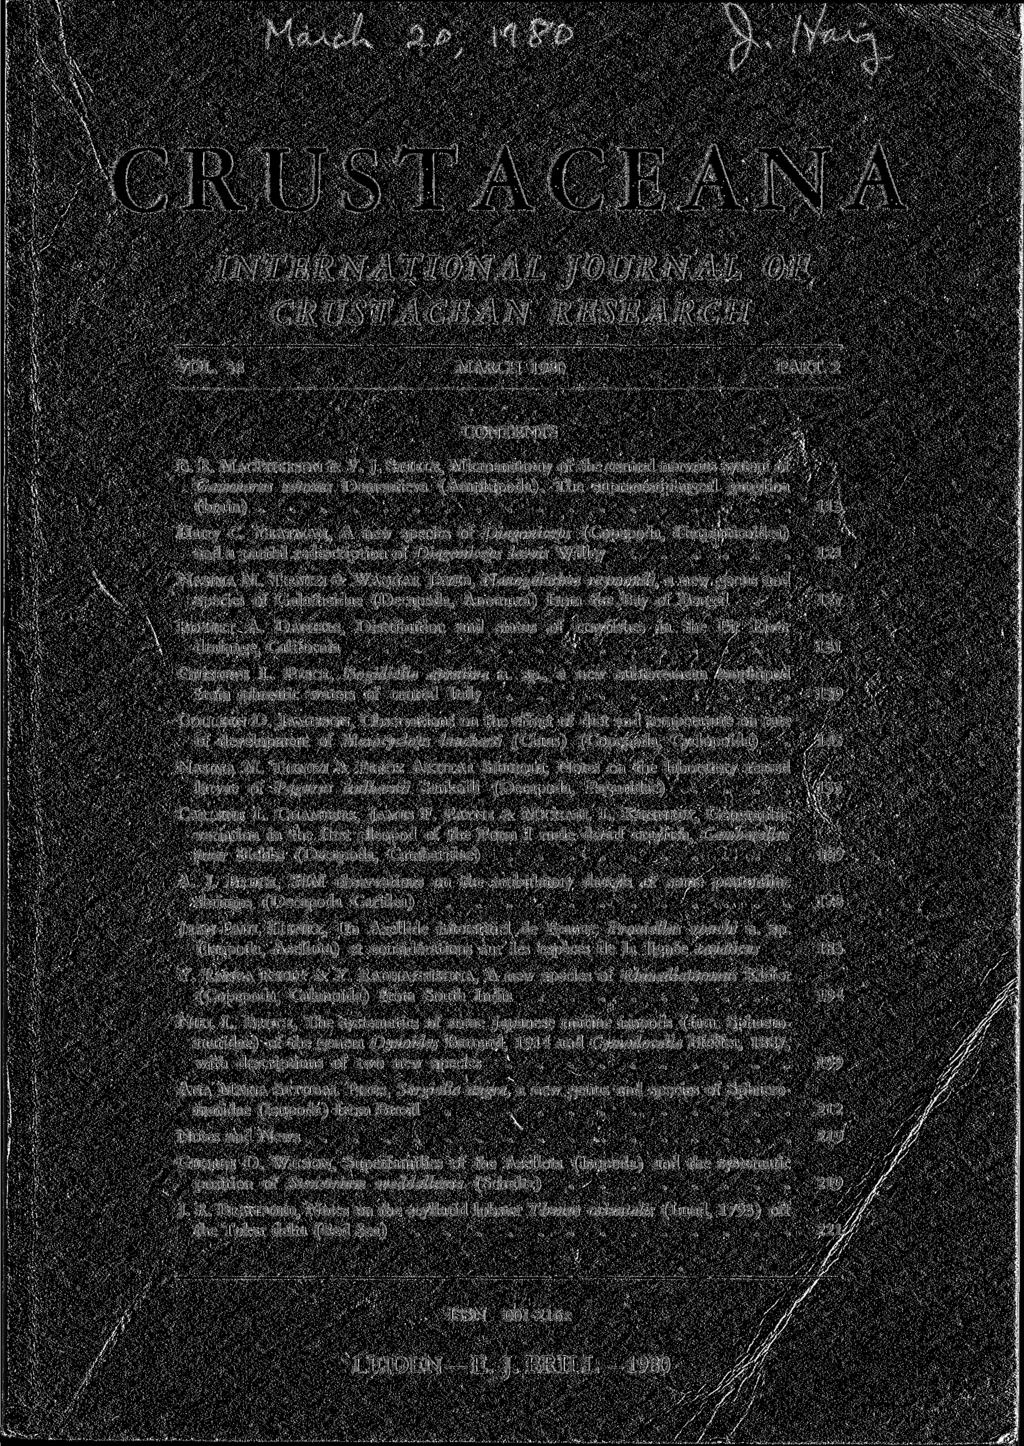 VKO^JU ^^li-ay^ OO^ K F D CRUSTACEANA INTERNATIONAL CRUSTACEAN VOL 38 JOURNAL OF RESEARCH MARCH 1980 PART 2 CONTENTS B R MACPHERSON & V J STEELE, Microanatomy of the central nervous system of